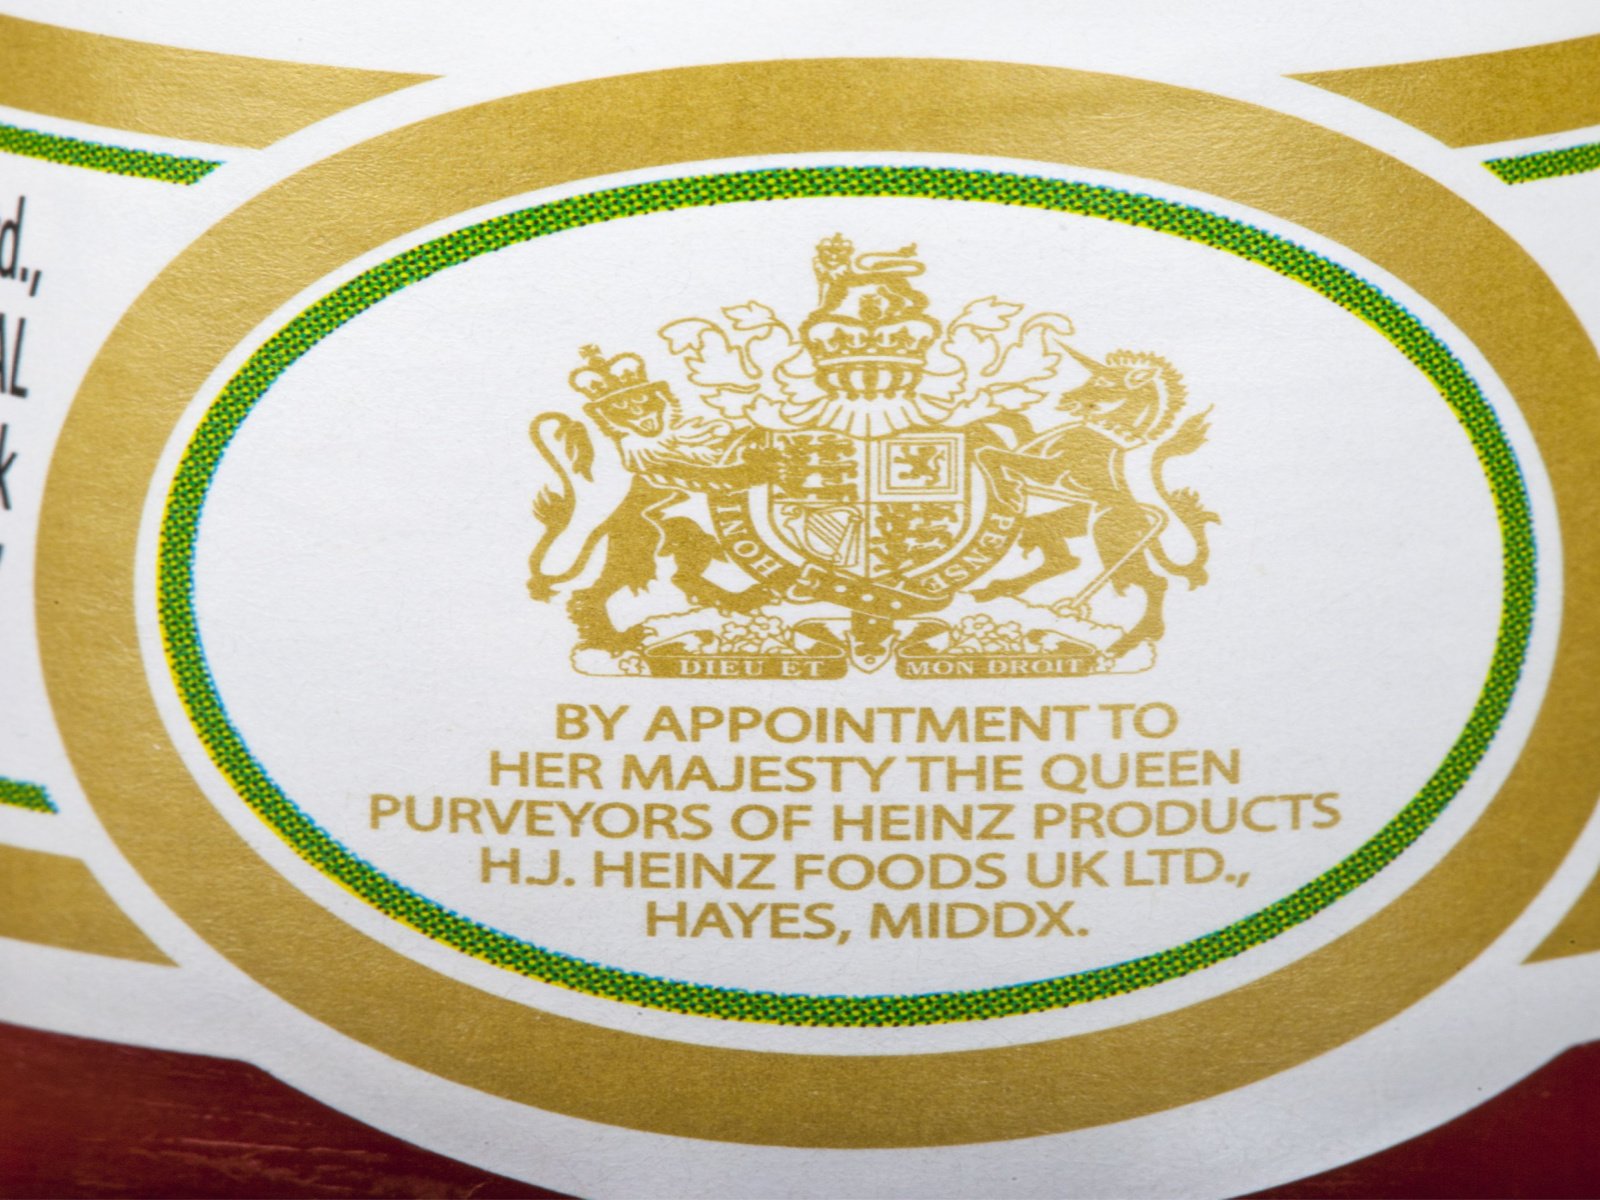 The Royal Warrant of Appointment on a bottle&nbsp;of Heinz ketchup